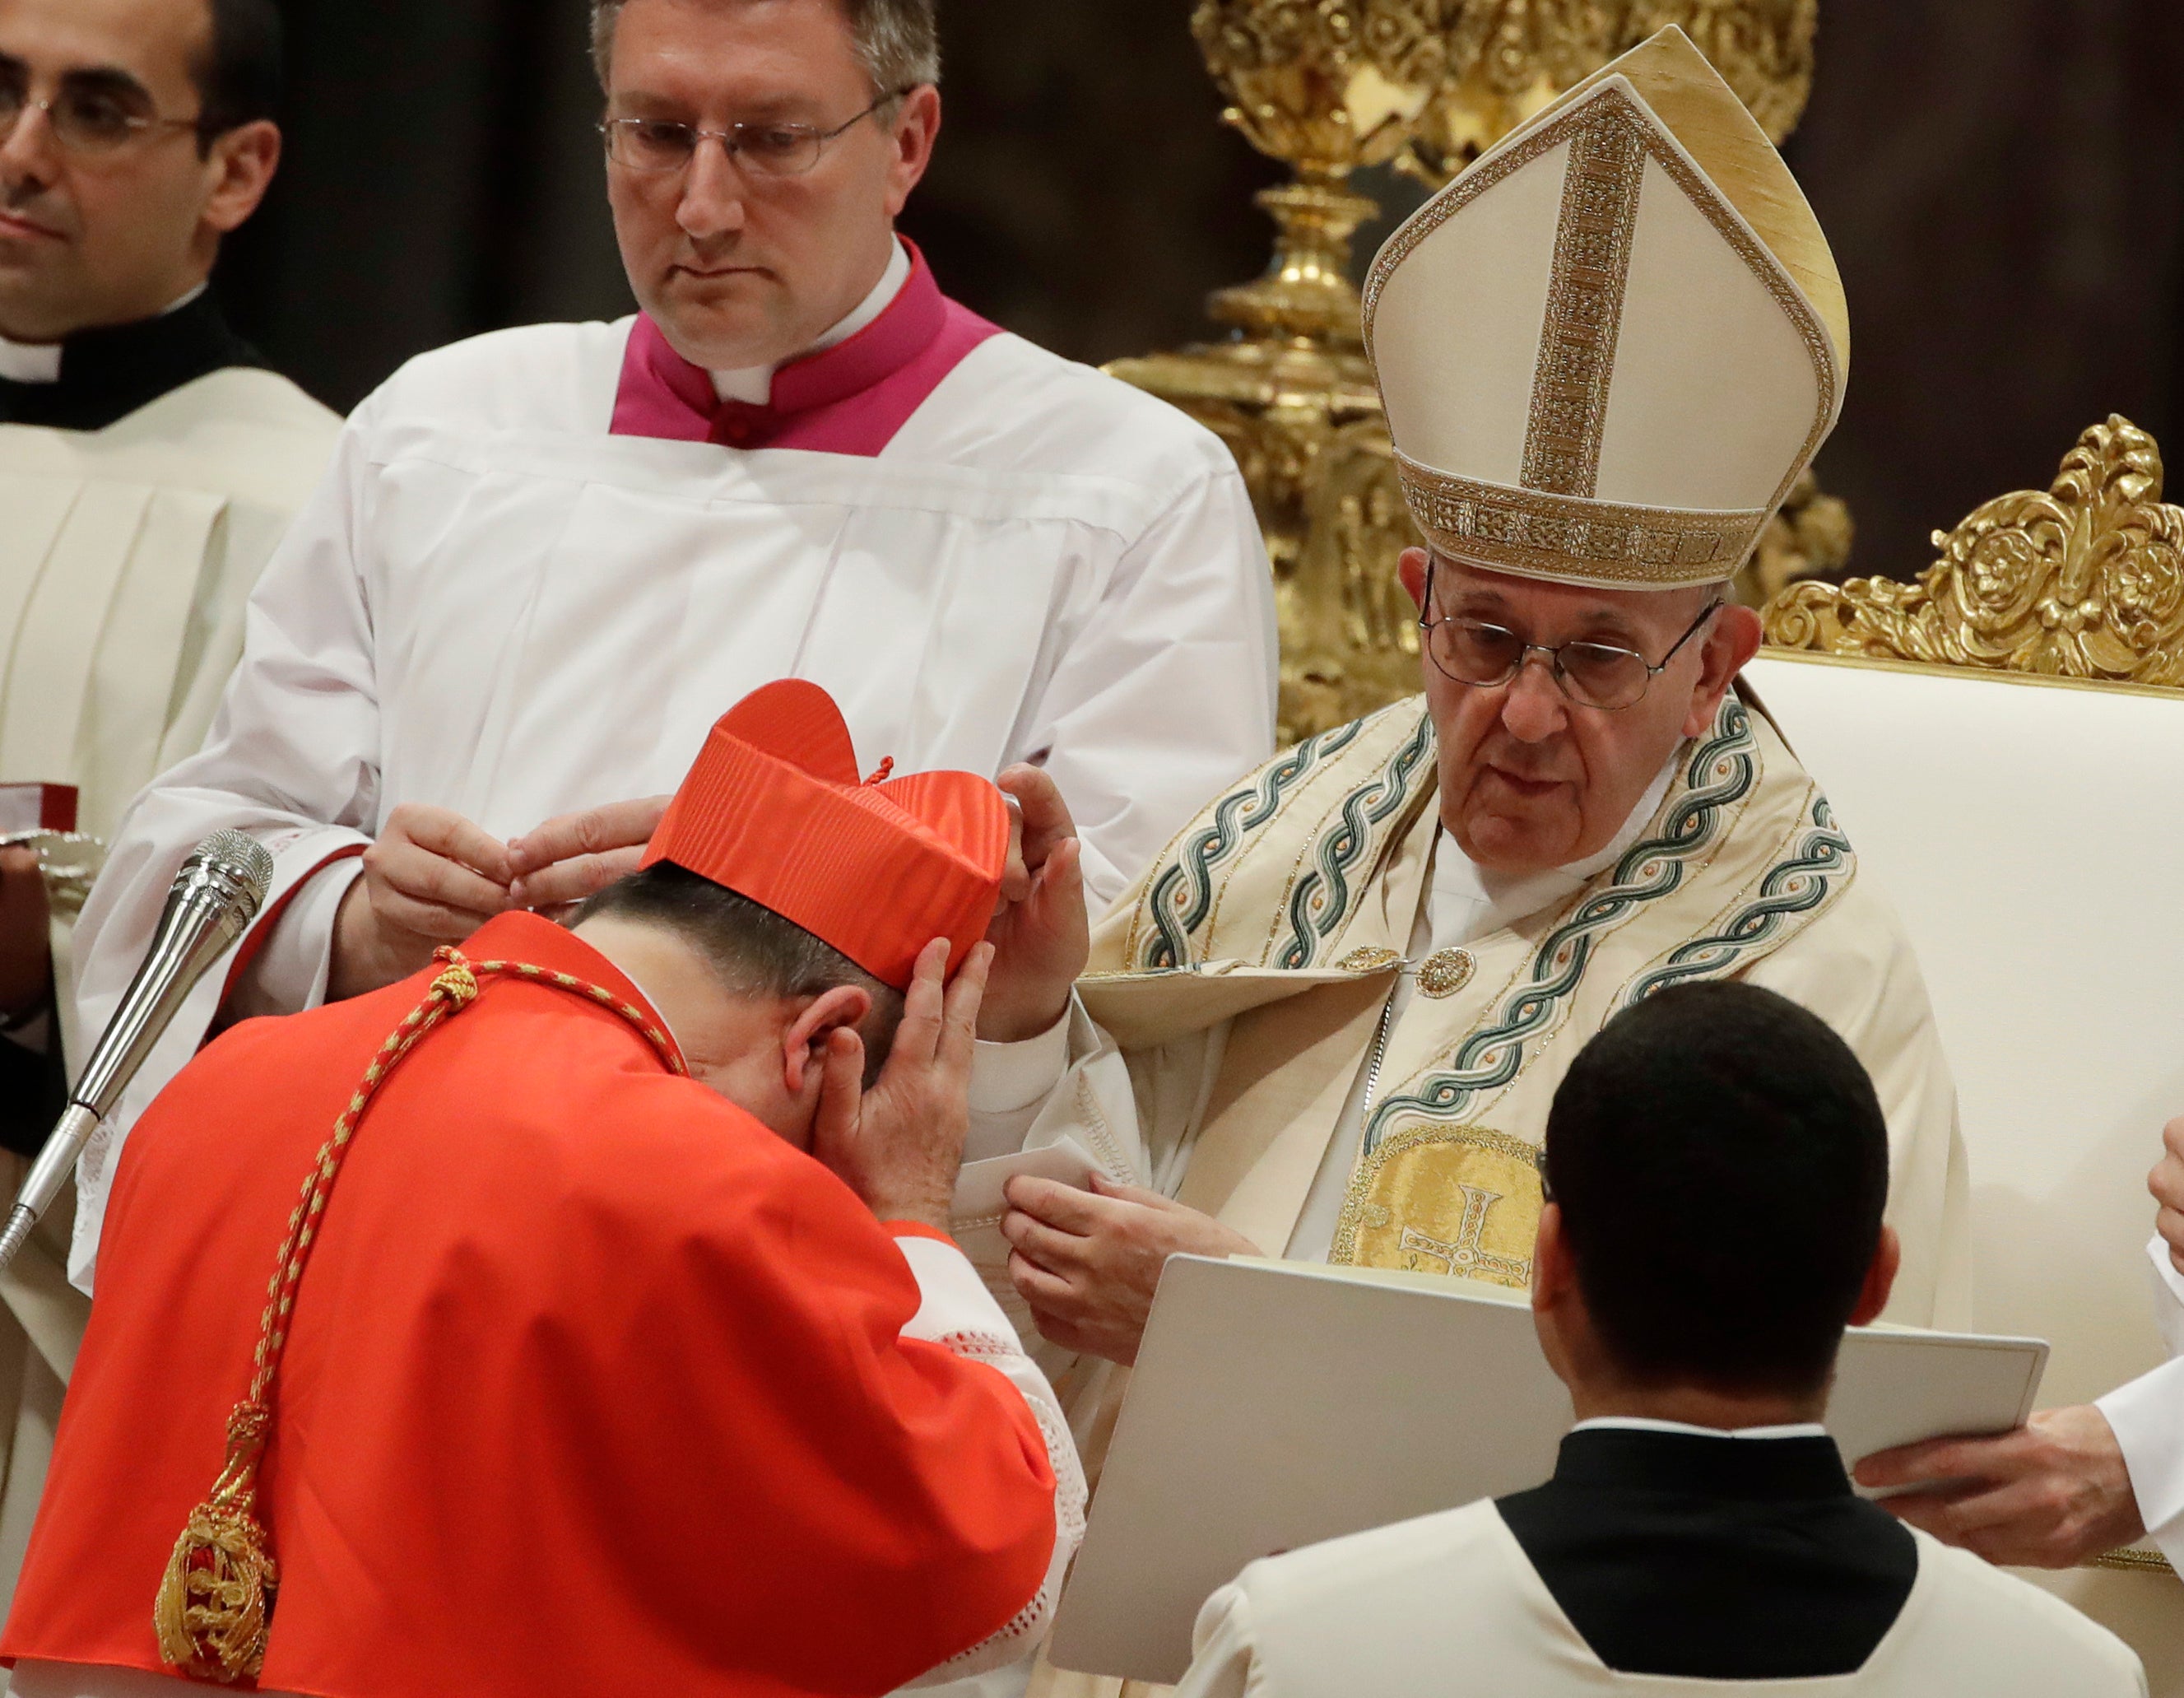 FILE - In this Thursday, June 28, 2018 file photo, Cardinal Giovanni Angelo Becciu receives the red three-cornered biretta hat from Pope Francis during a consistory in St. Peter's Basilica at the Vatican